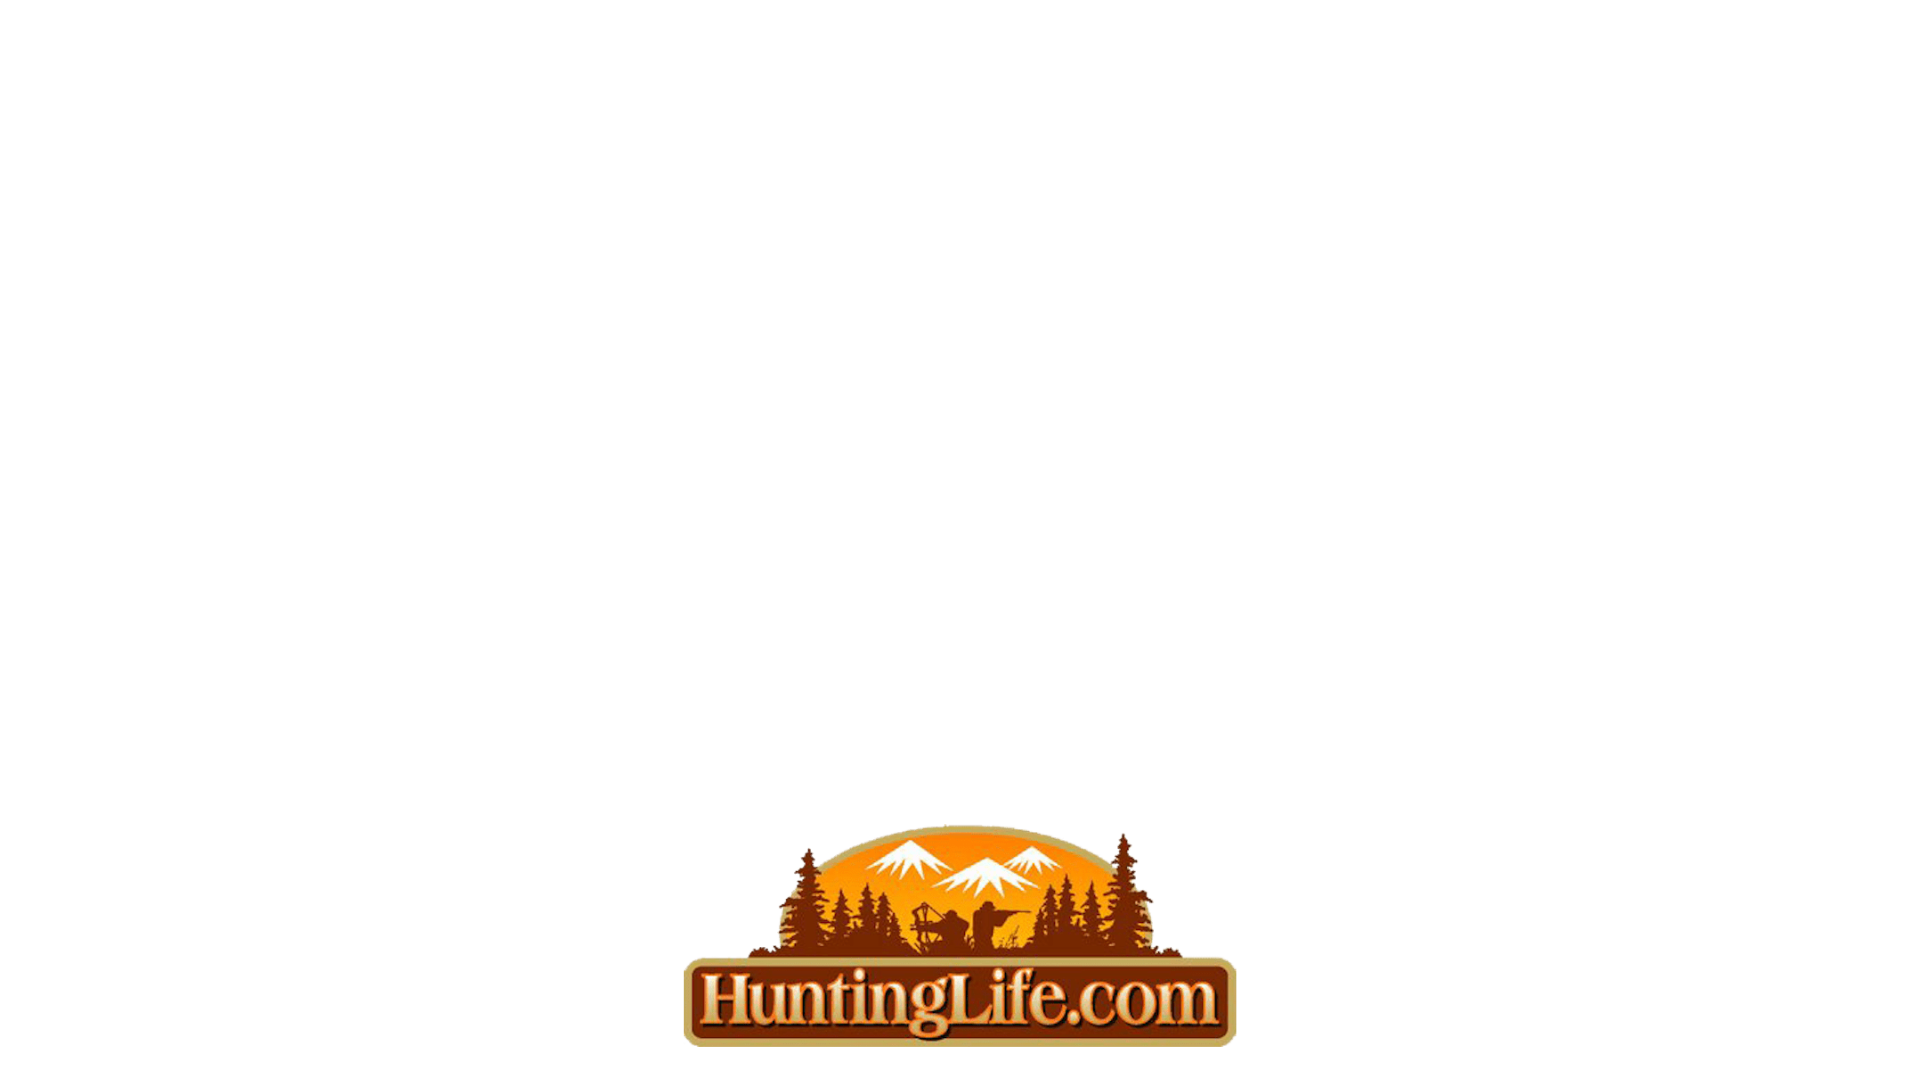 A logo for huntinglife.com with a mountain in the background